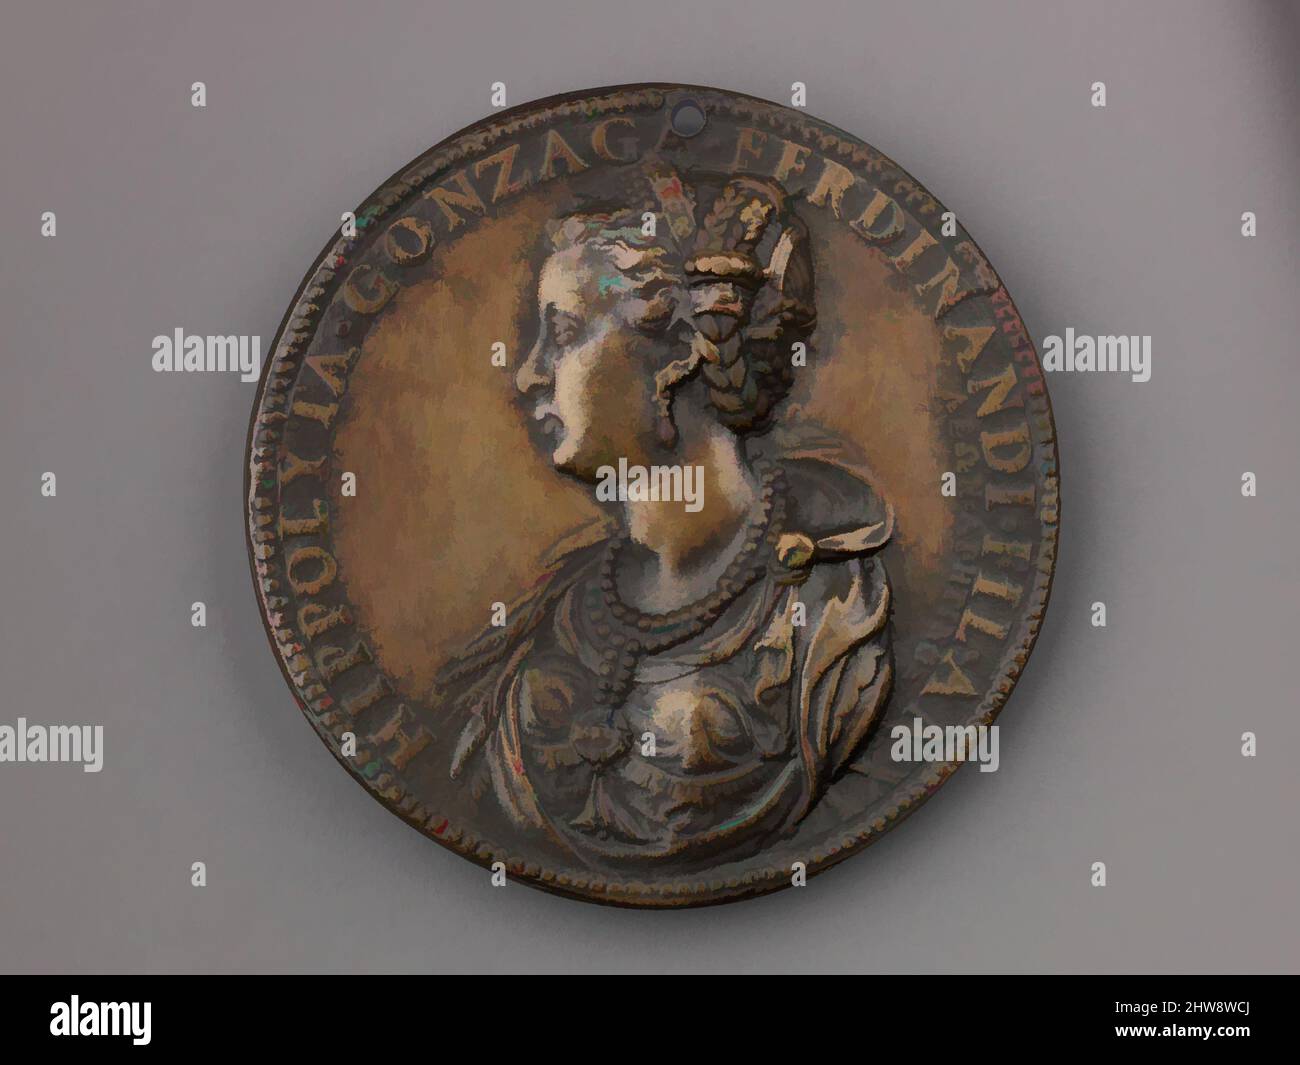 Art inspired by Medal: Ippolita Gonzaga, model 1551 (possibly cast 19th century), Bronze (Copper alloy with worn, dark brown patina), Diam. 6.6 cm, wt. 75.96 g., Medals, Leone Leoni (Italian, Menaggio ca. 1509–1590 Milan), On the obverse is a portrait of Ippolita Gonzaga of Mantua (, Classic works modernized by Artotop with a splash of modernity. Shapes, color and value, eye-catching visual impact on art. Emotions through freedom of artworks in a contemporary way. A timeless message pursuing a wildly creative new direction. Artists turning to the digital medium and creating the Artotop NFT Stock Photo